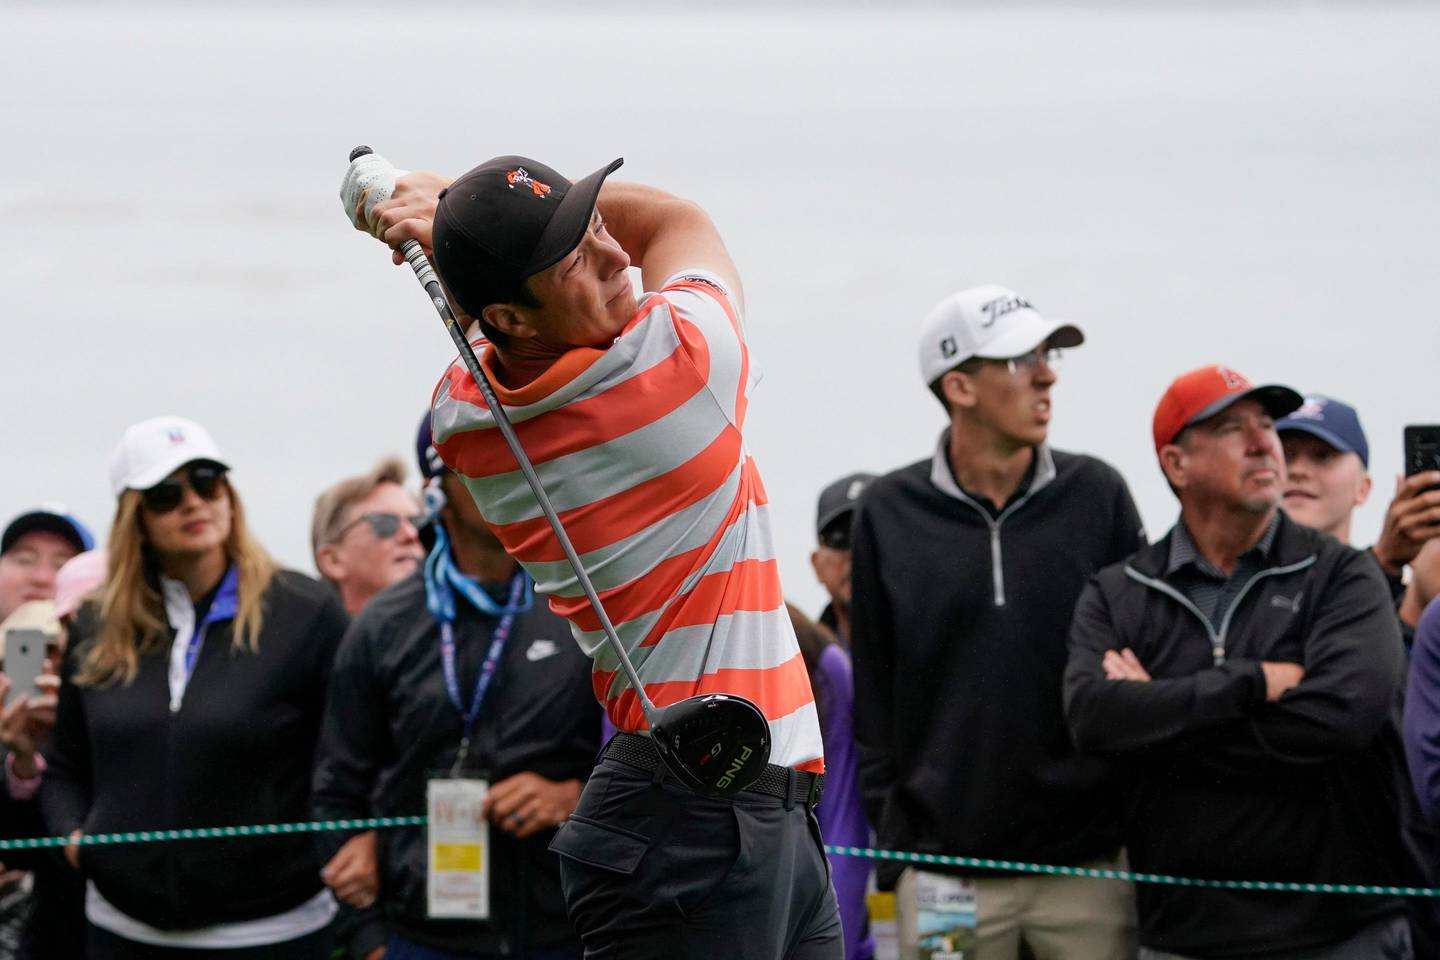 Amateur player, Viktor Hovland, of Norway, watches his tee shot on the 14th hole during the second round of the U.S. Open Championship golf tournament, Friday, June 14, 2019. (AP Photo/Carolyn Kaster)